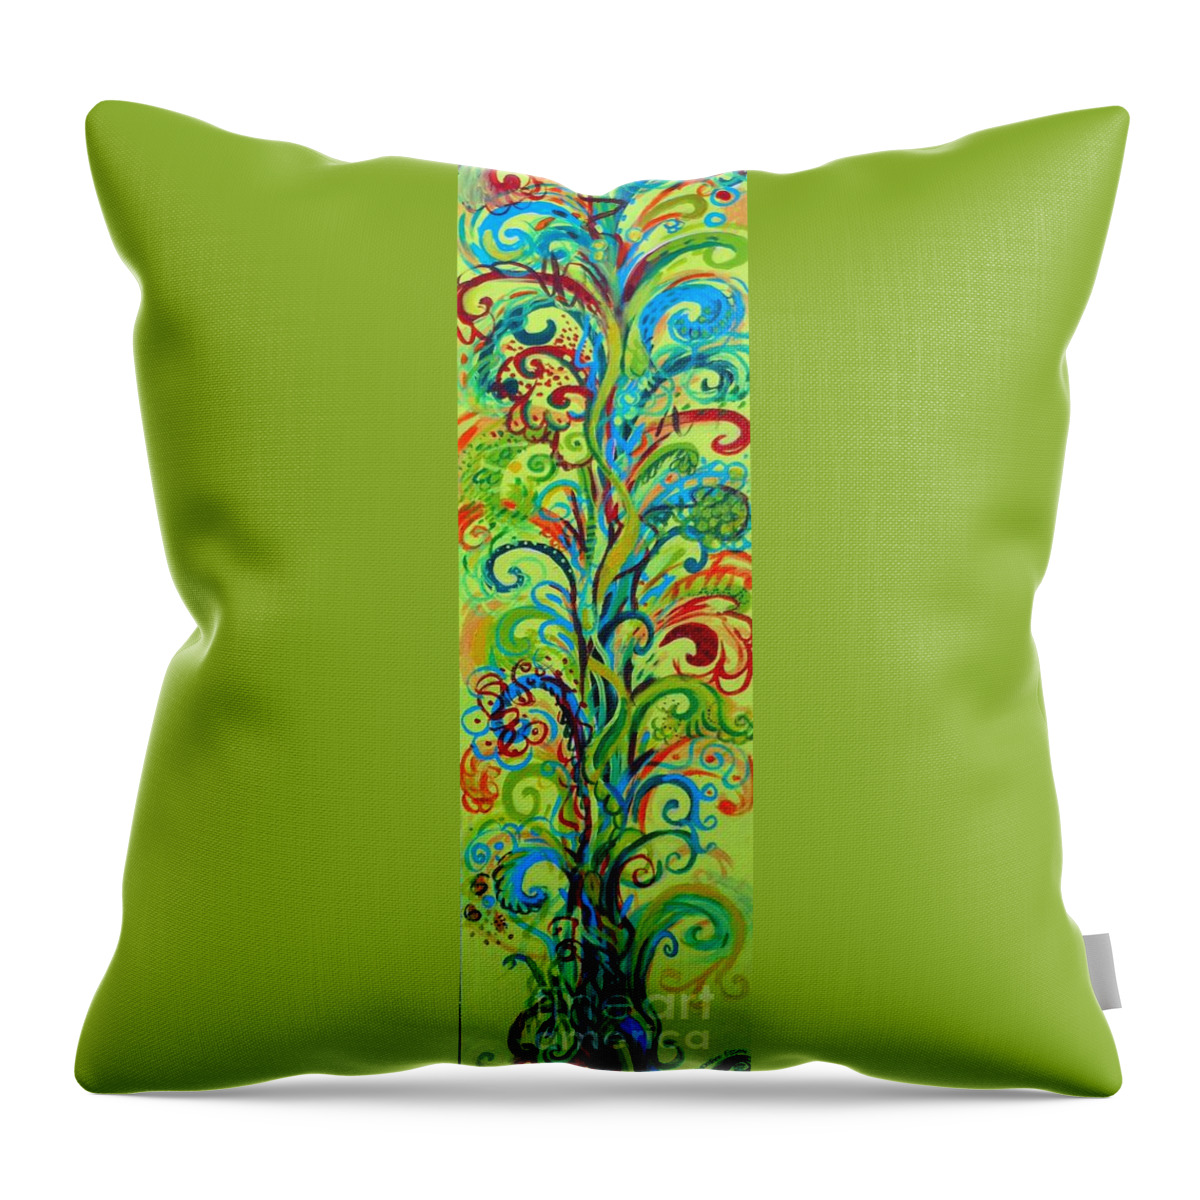 Tree Throw Pillow featuring the painting Whirlygig Tree by Genevieve Esson